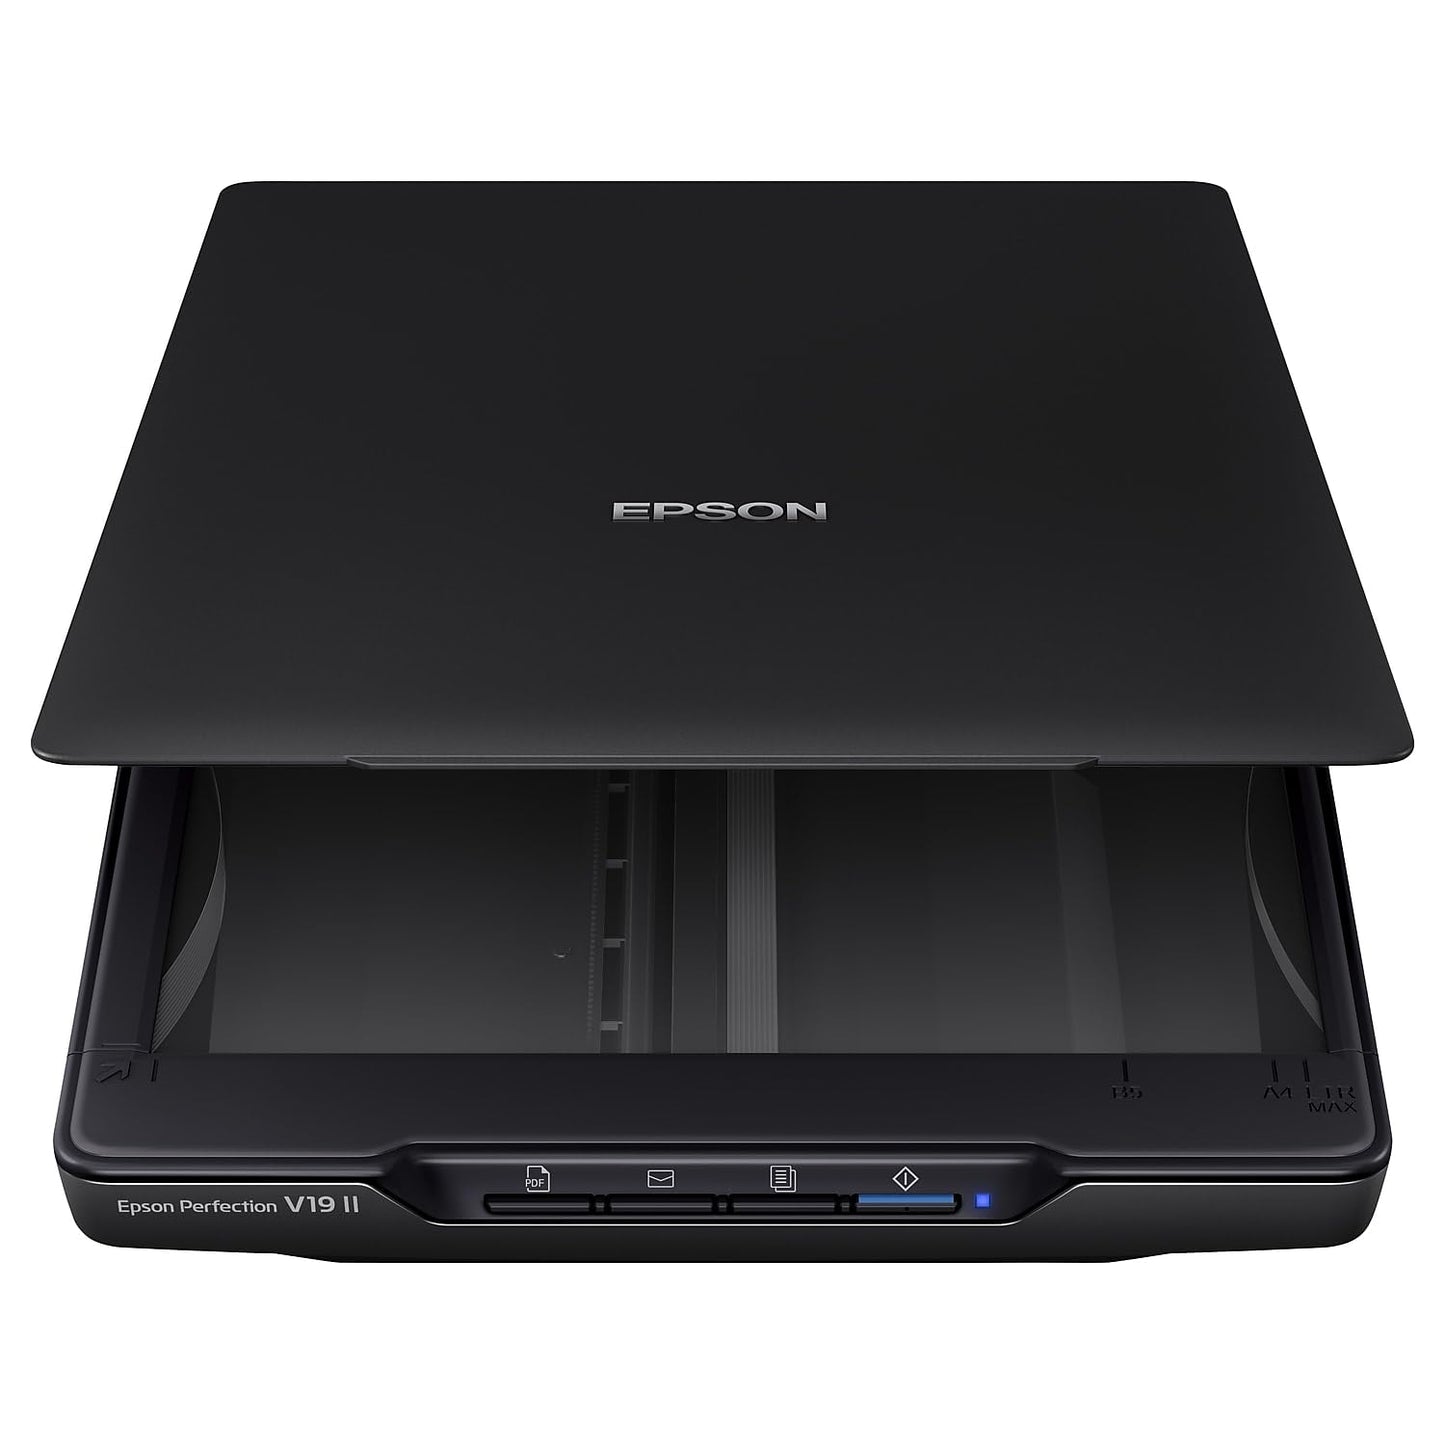 Epson Perfection V19 II Color Photo and Document Flatbed Scanner with 4800 dpi Optical Resolution, USB Power and High-Rise, Removable Lid